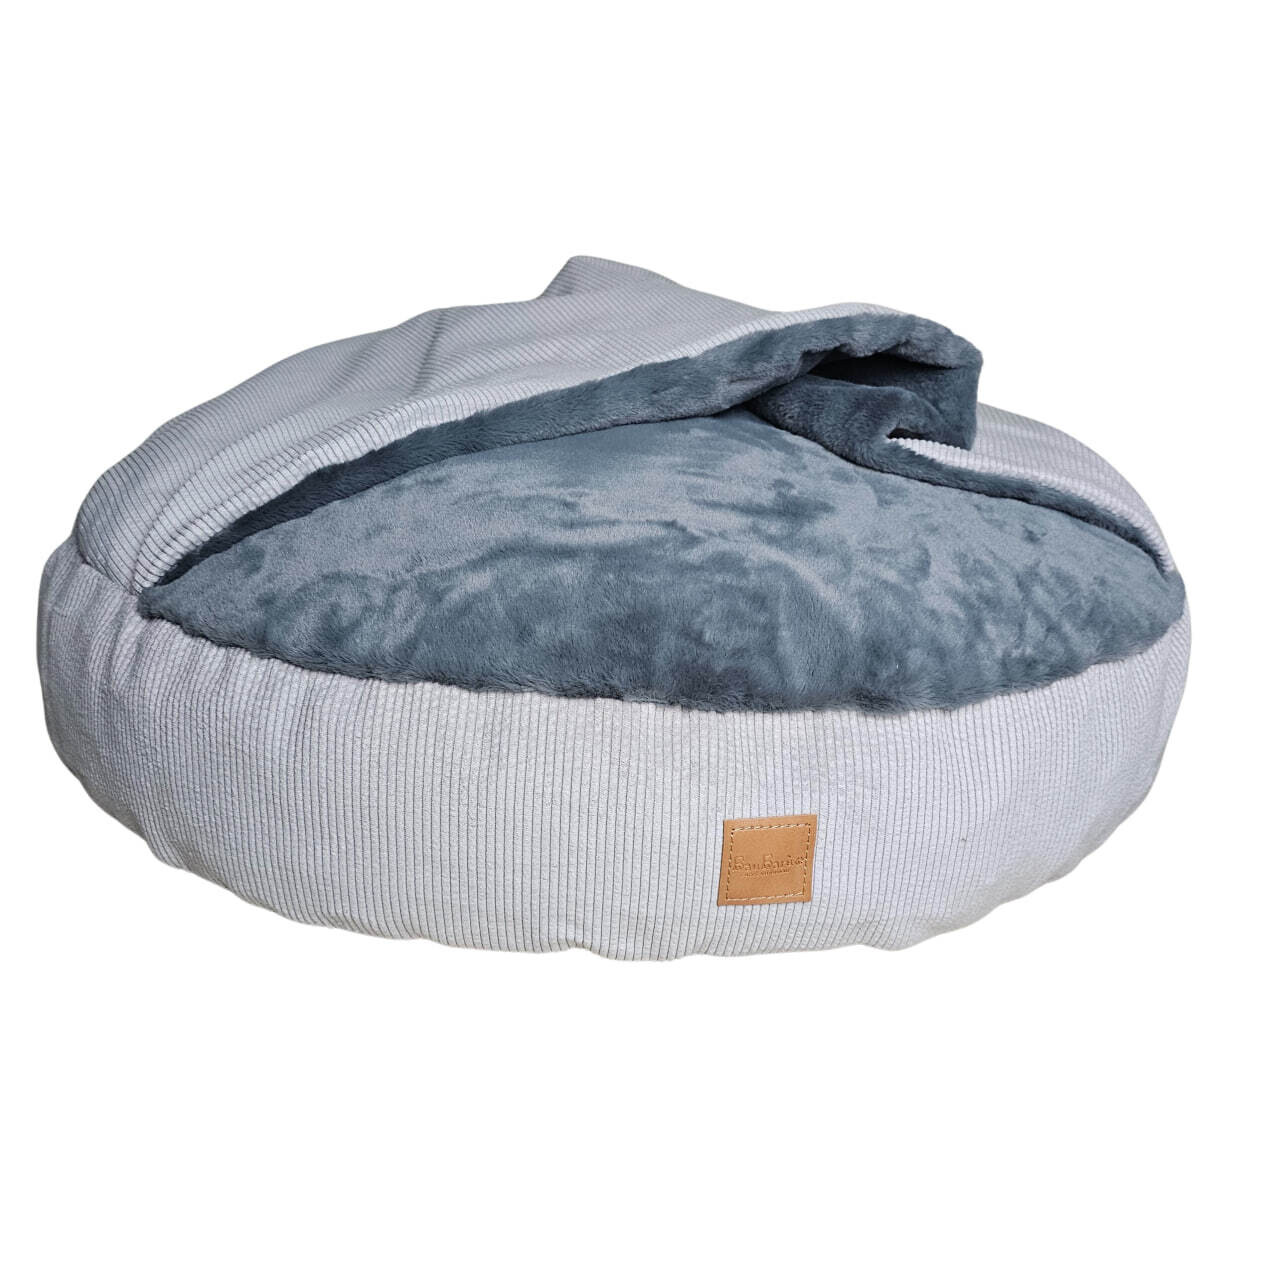 Cave bed Florence Grey + castorino grey, Size: 80cm